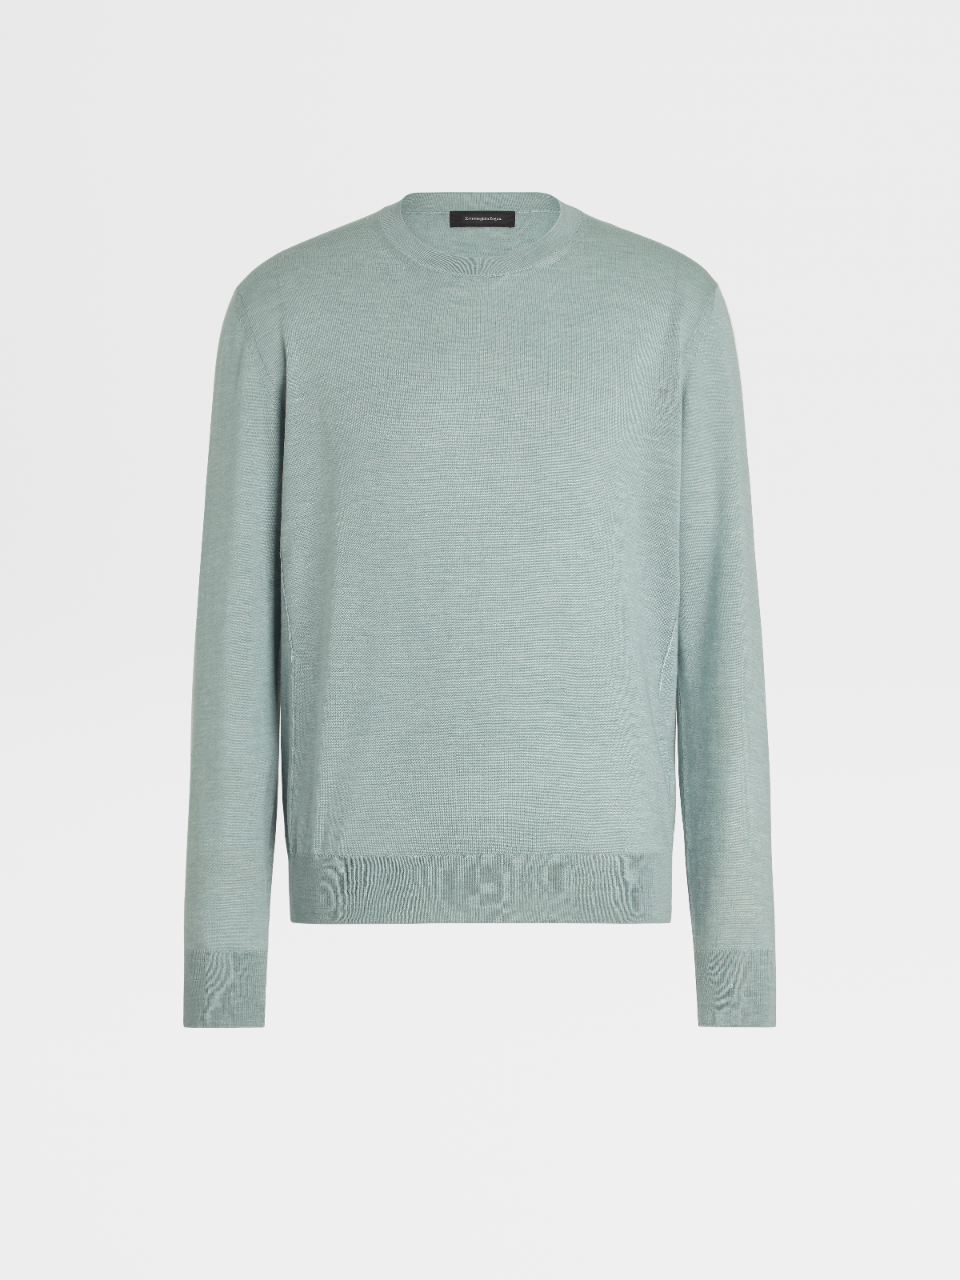 Pastel Green Faded Silk Cashmere and Linen Knit Crewneck